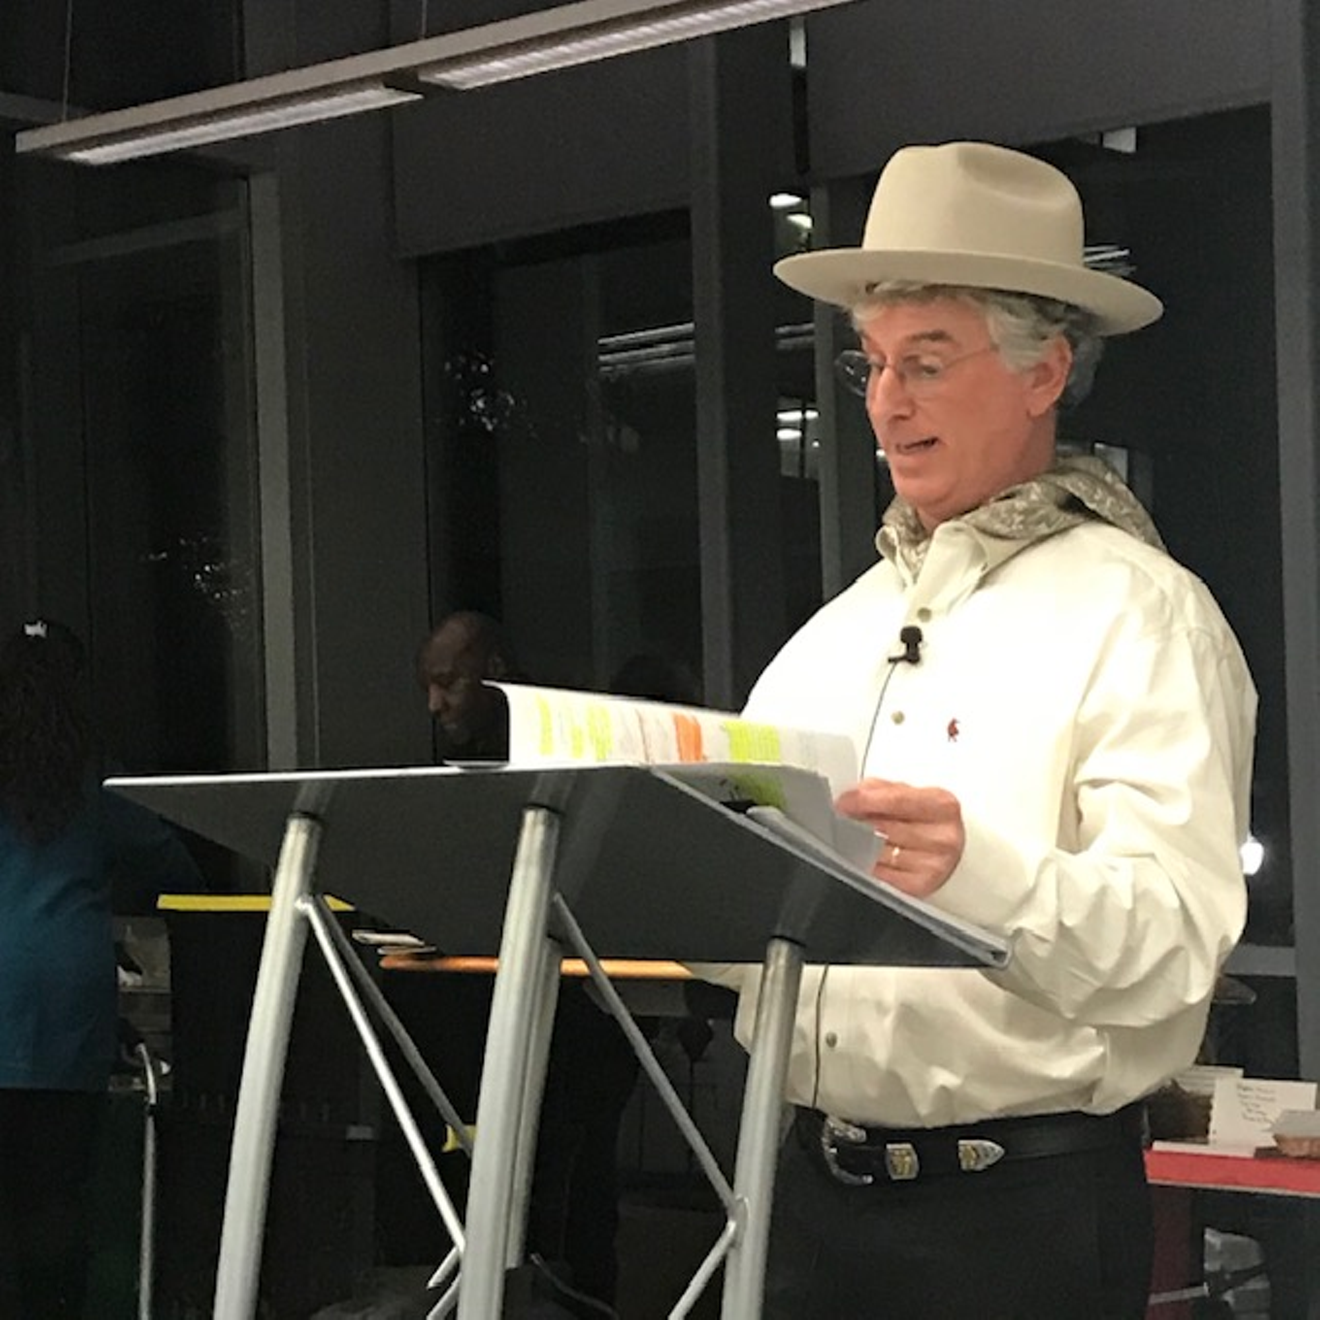 Dave Lieber reads his play at a recent Christmas party.